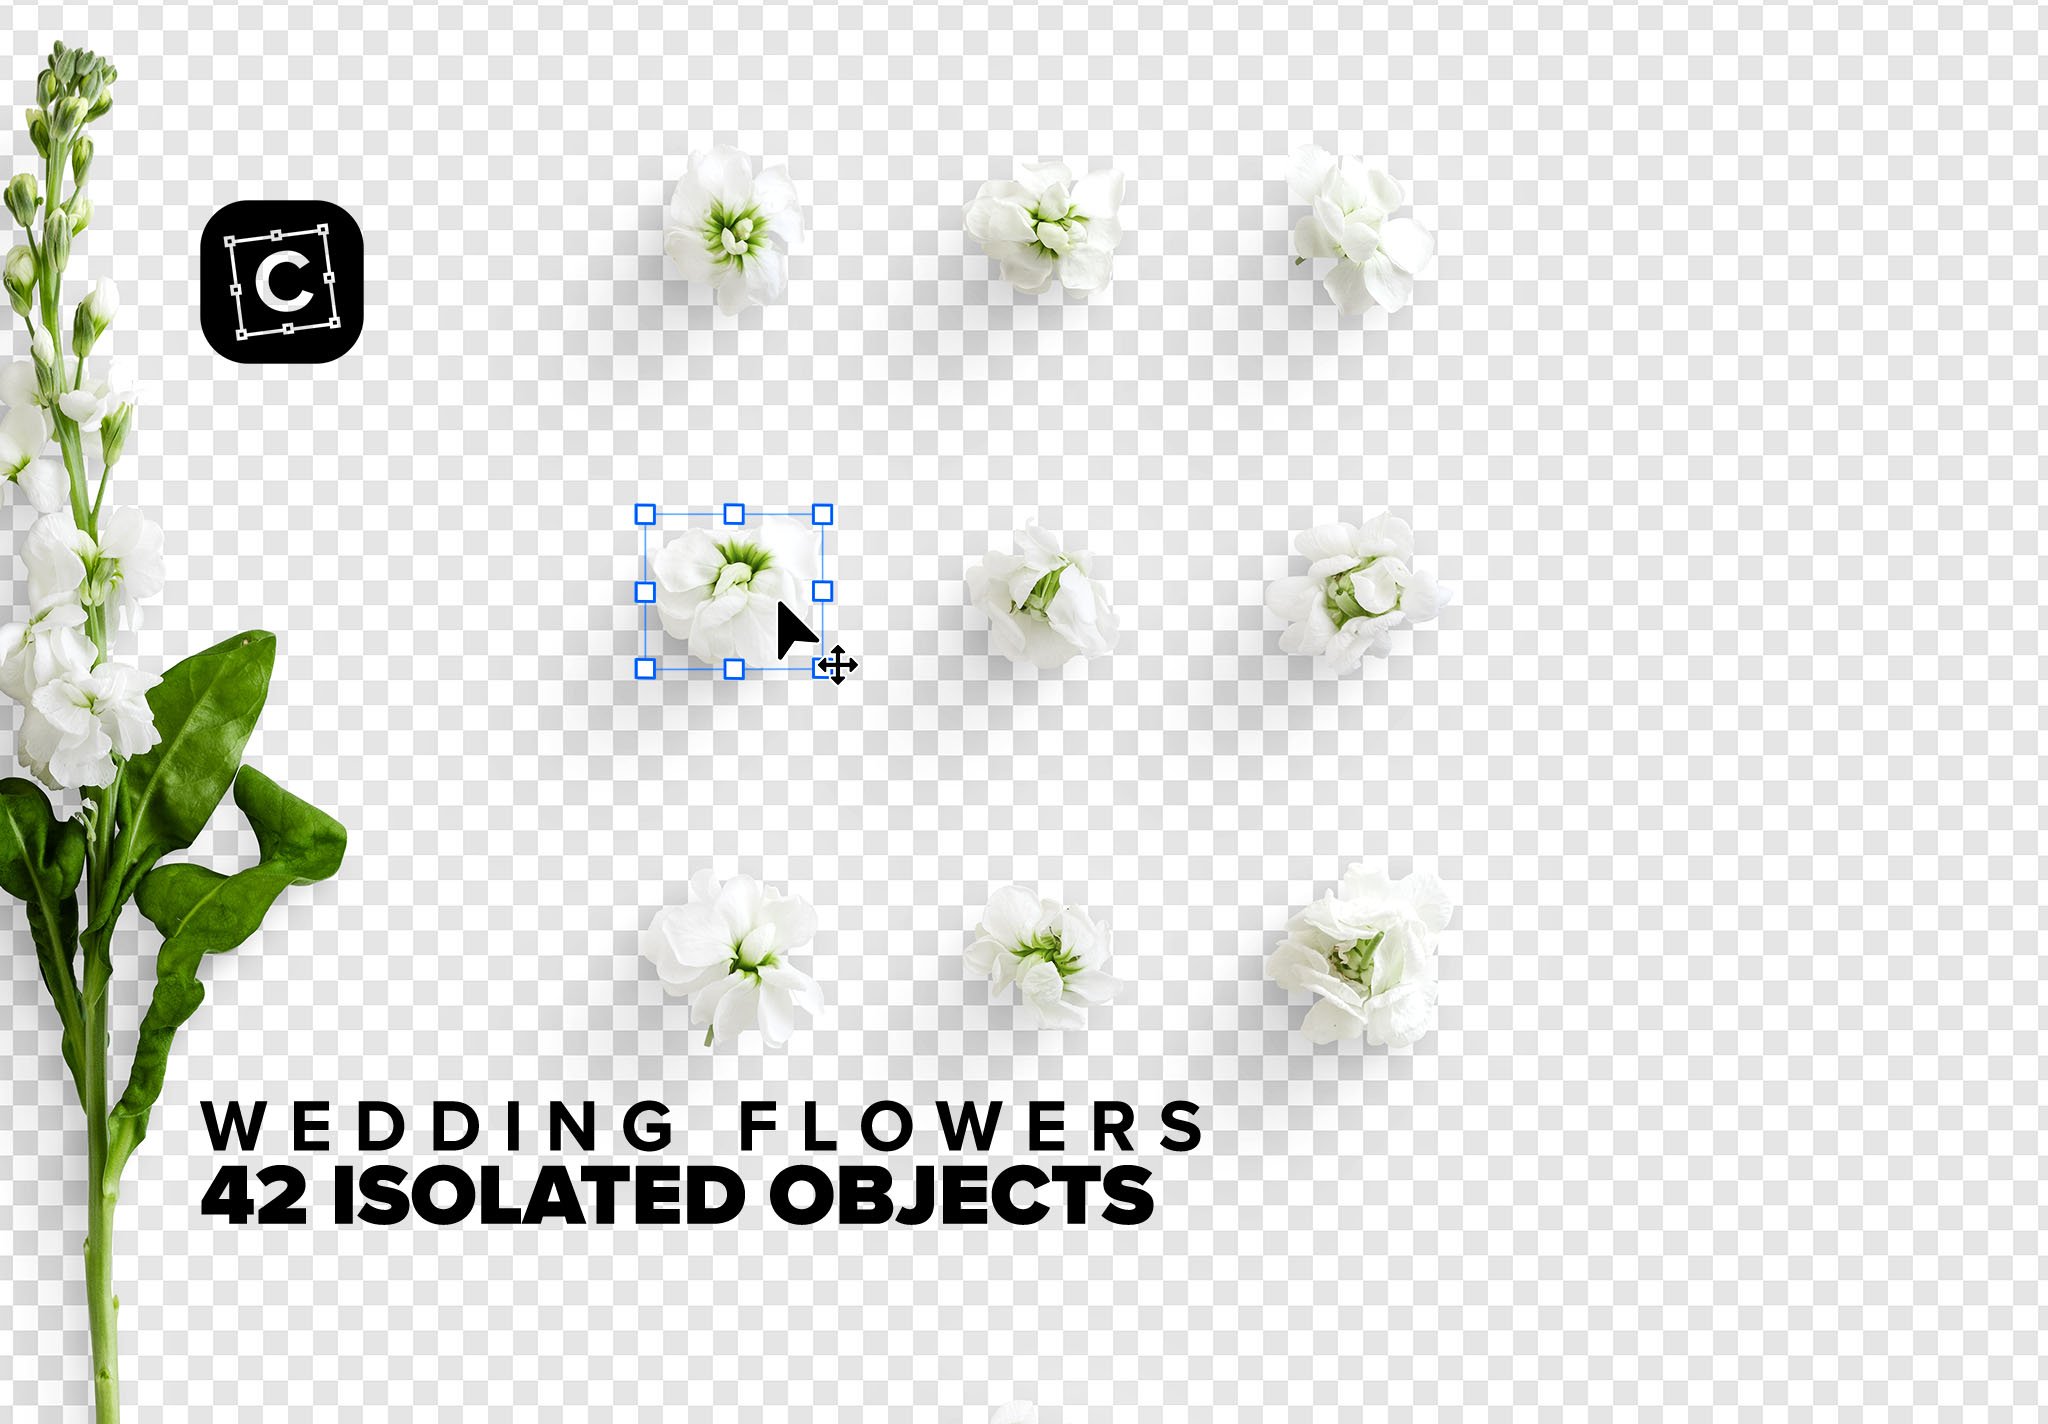 wedding flowers 03 isolated objects 187